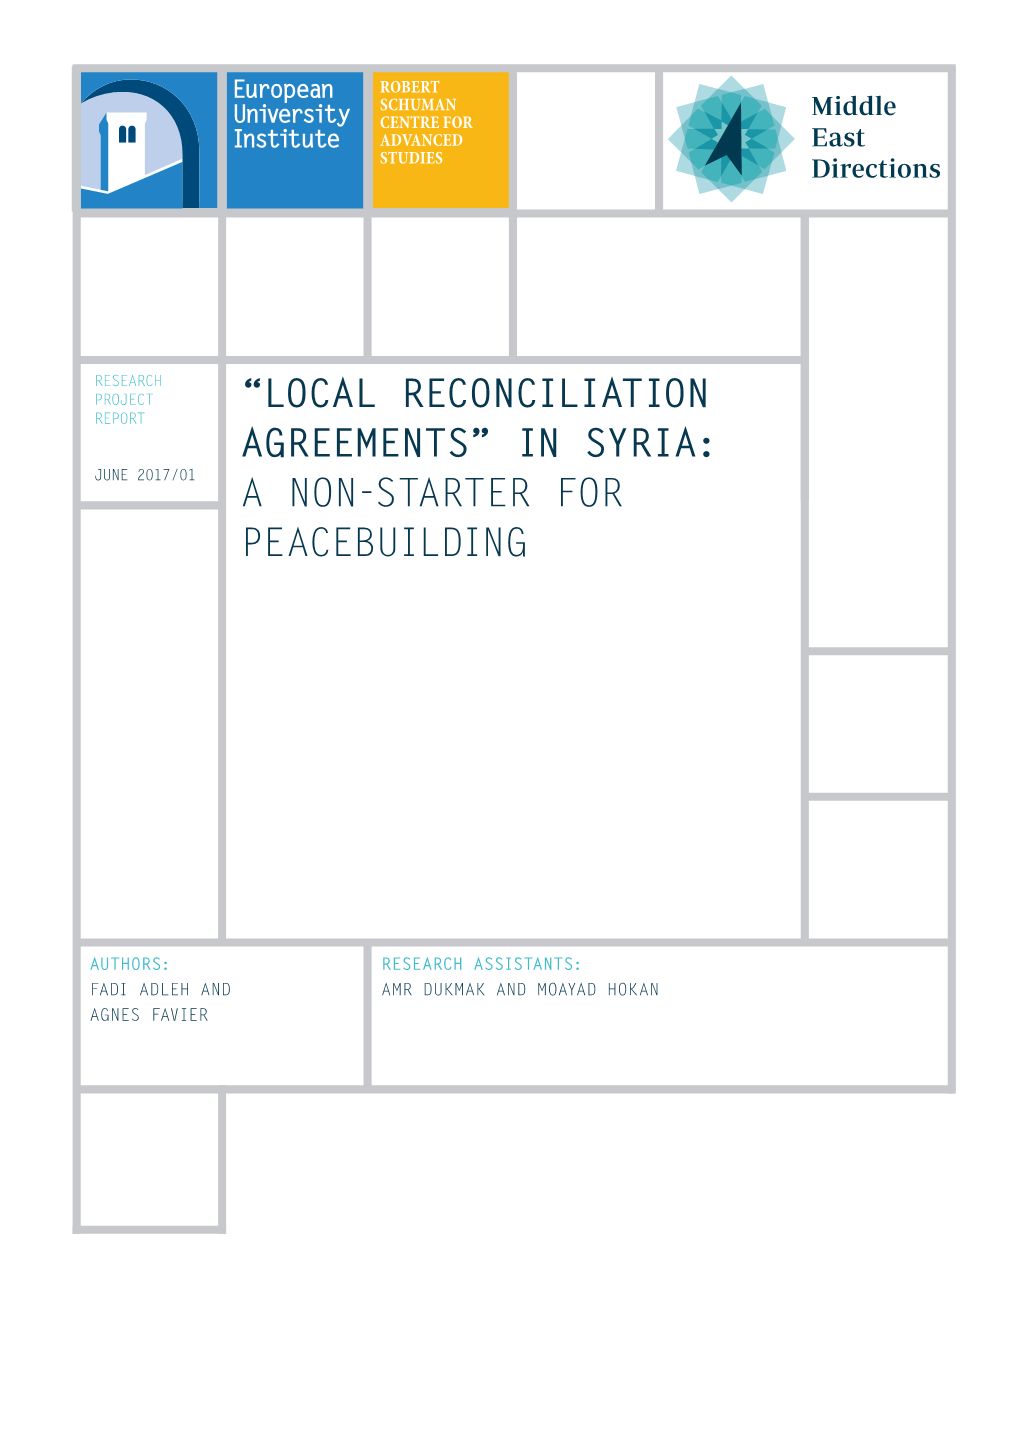 “Local Reconciliation Agreements” in Syria: a Non-Starter for Peacebuilding